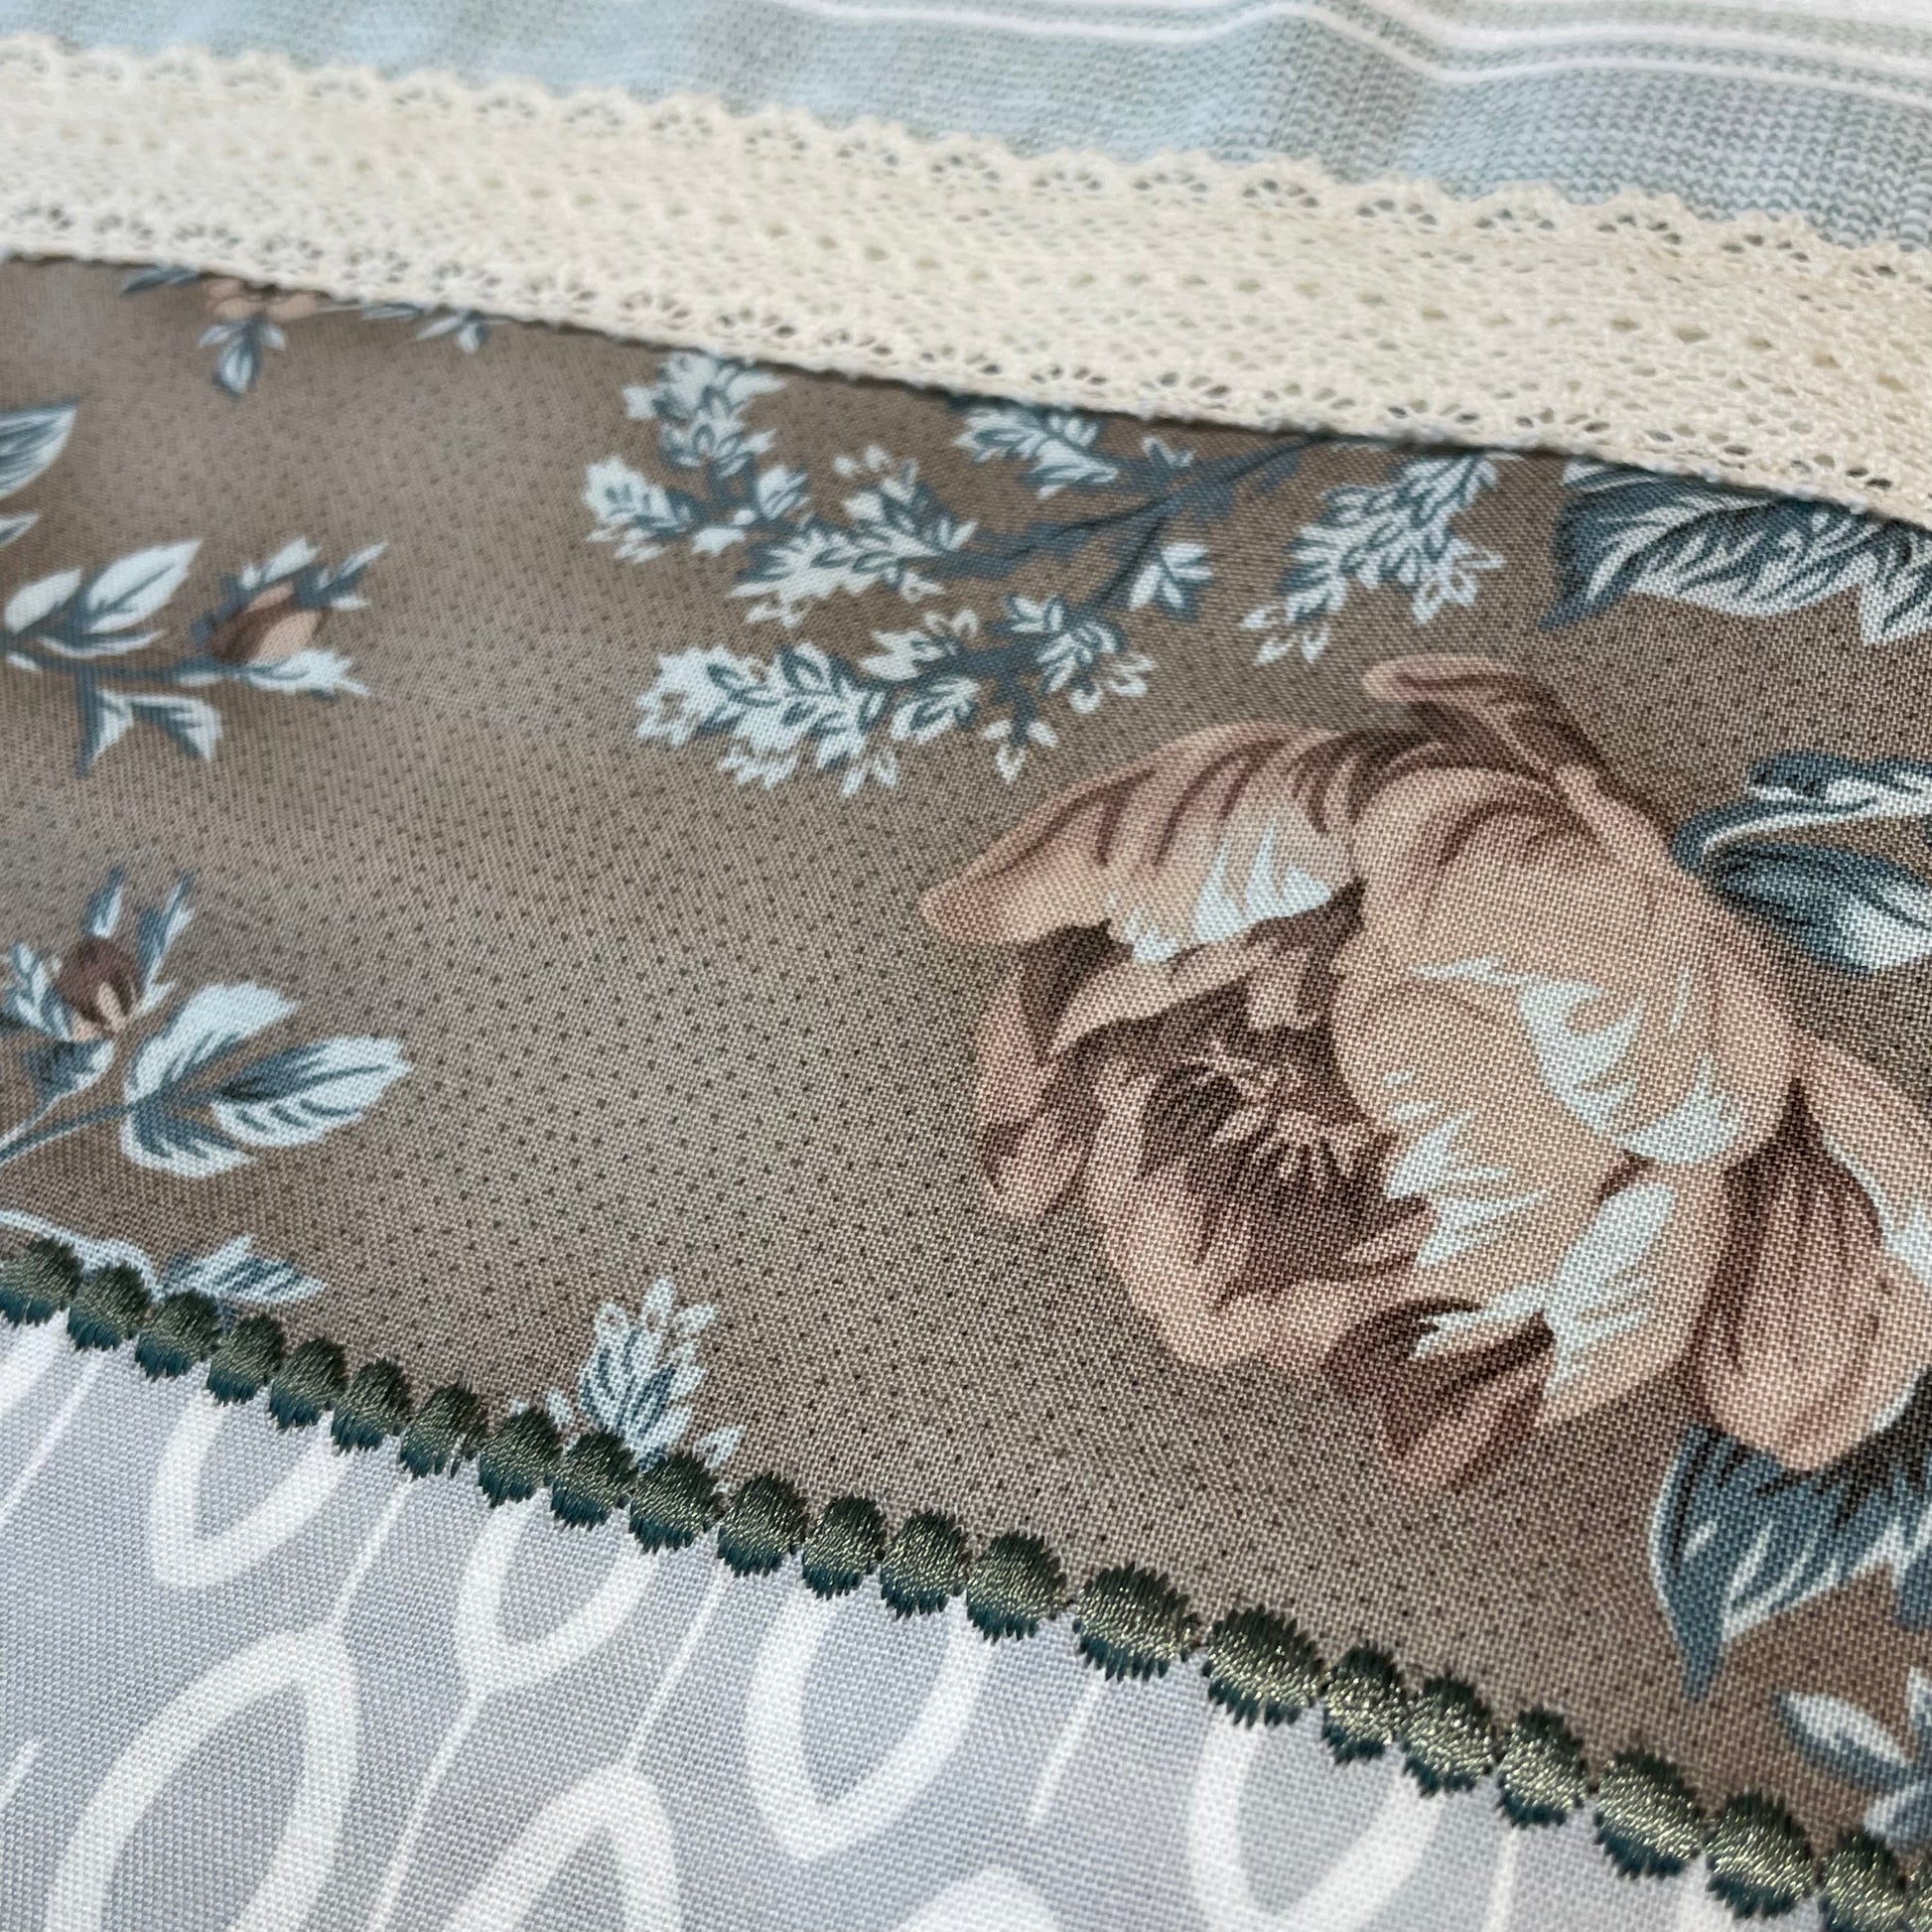 Farmhouse style dish towel. Farmhemian decor made easy with mix and match collections by Home Stitchery Decor. Grey french floral towel with cream cotton lace trim and embroidery stitching. Shop the entire collection or follow along on the Home Stitchery Decor YouTube Channel.